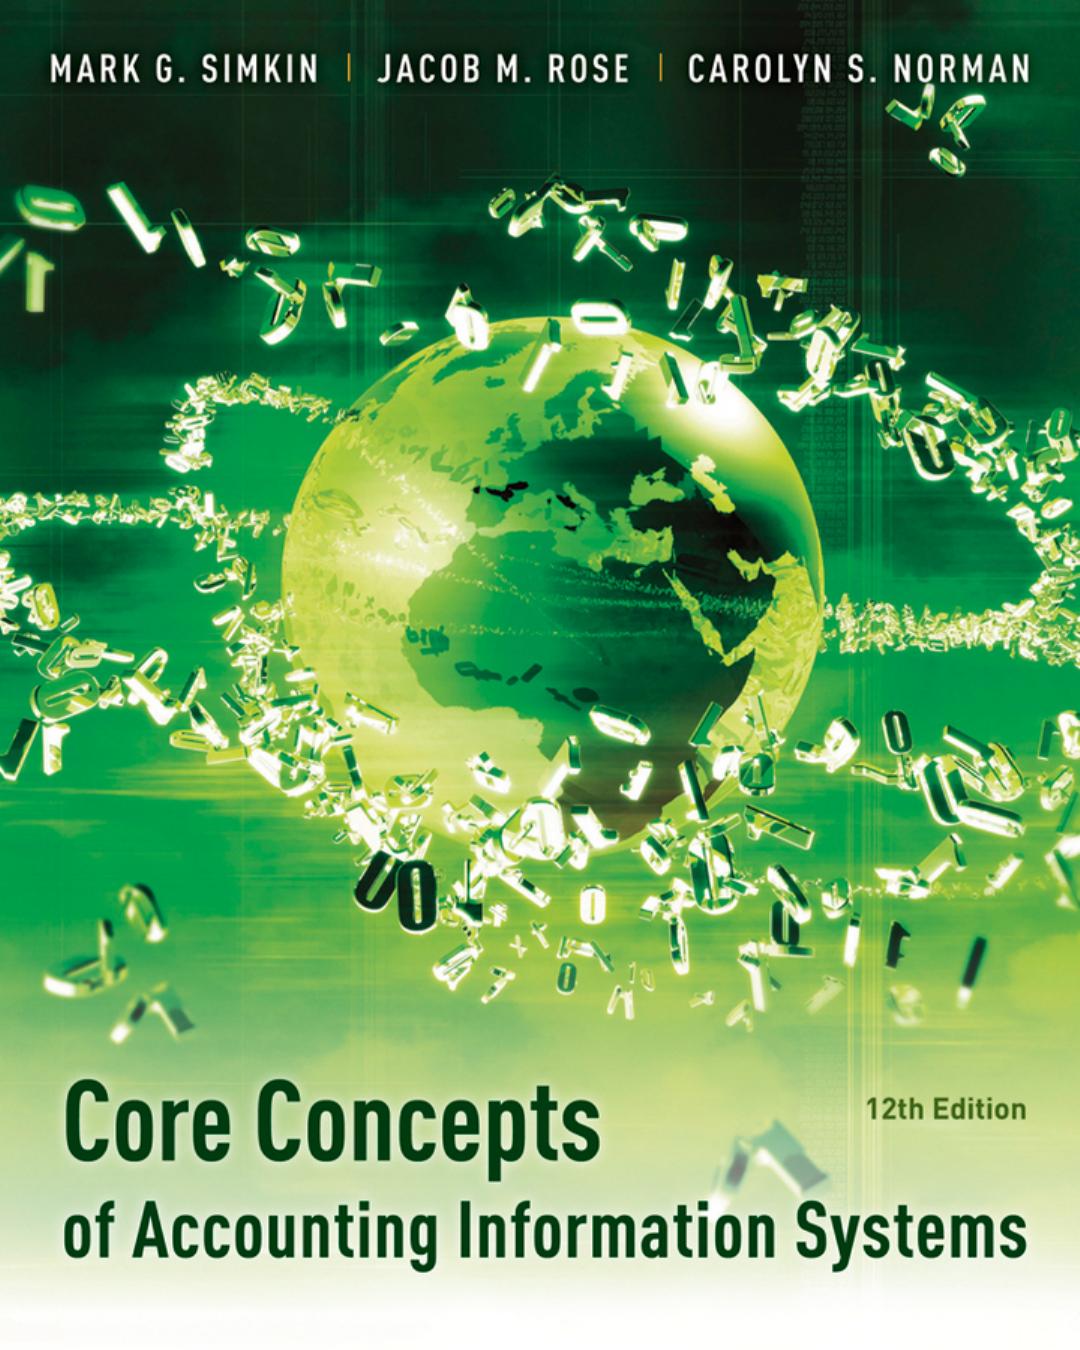 Core Concepts of Accounting Information Systems,12th Edition.jpg